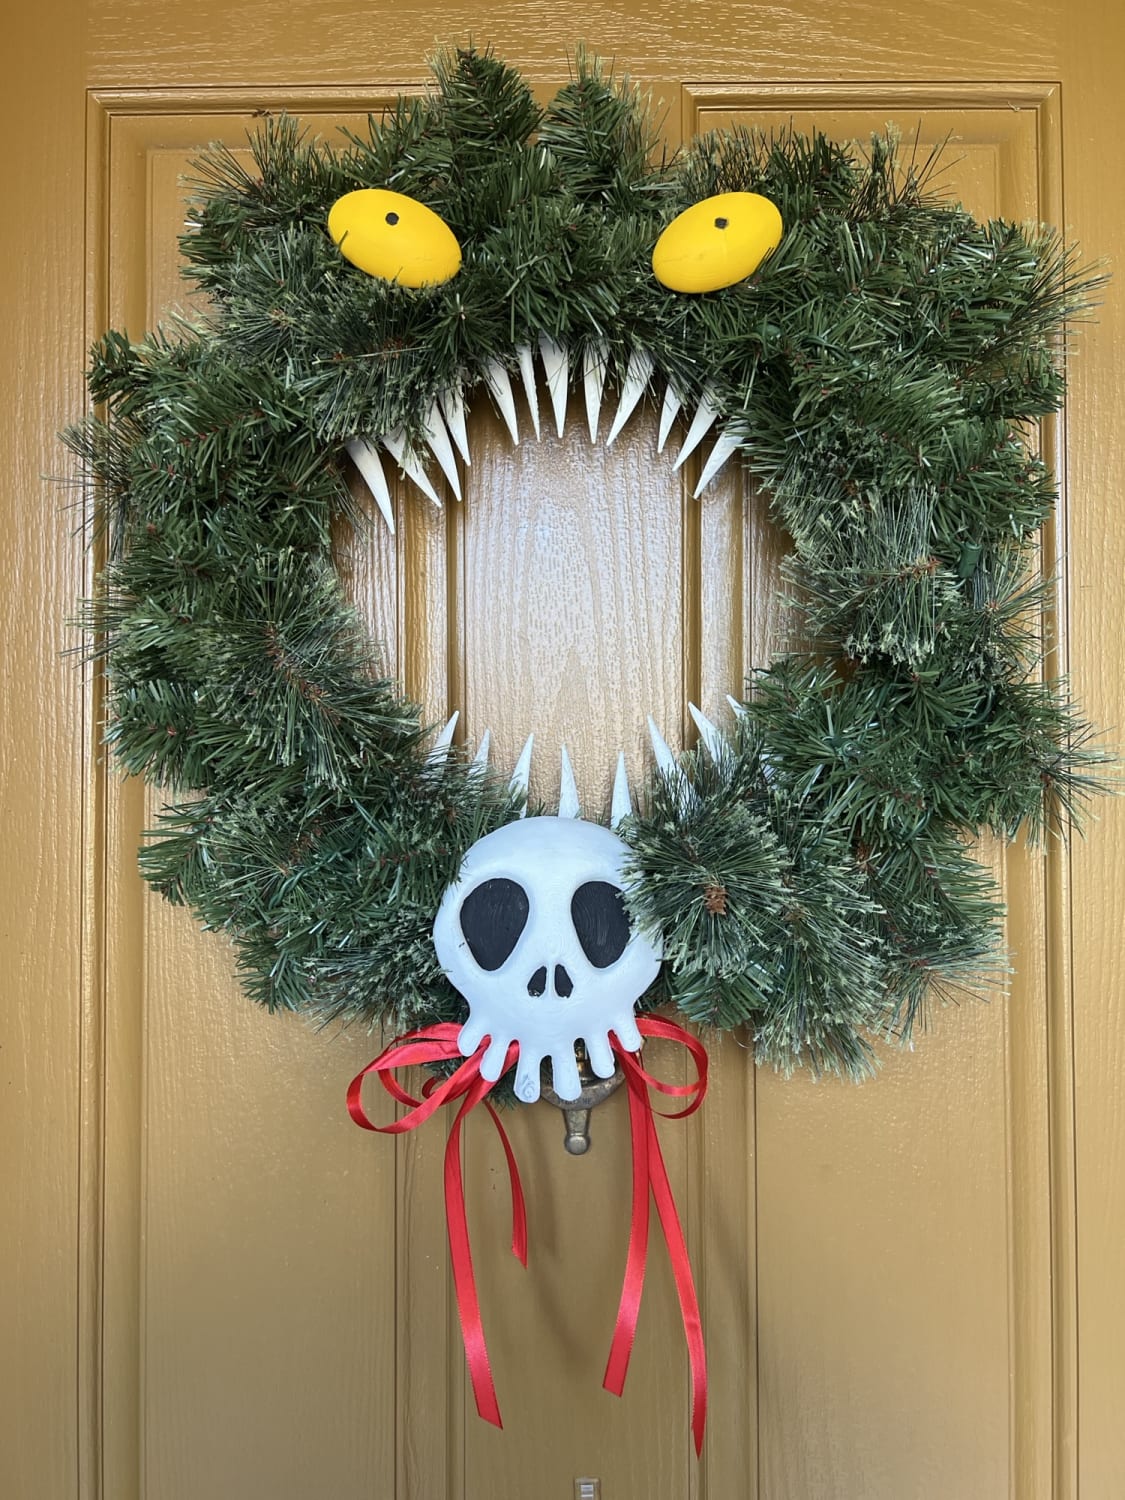 First 3D print for the holiday season, the wreath monster from The Nightmare Before Christmas!